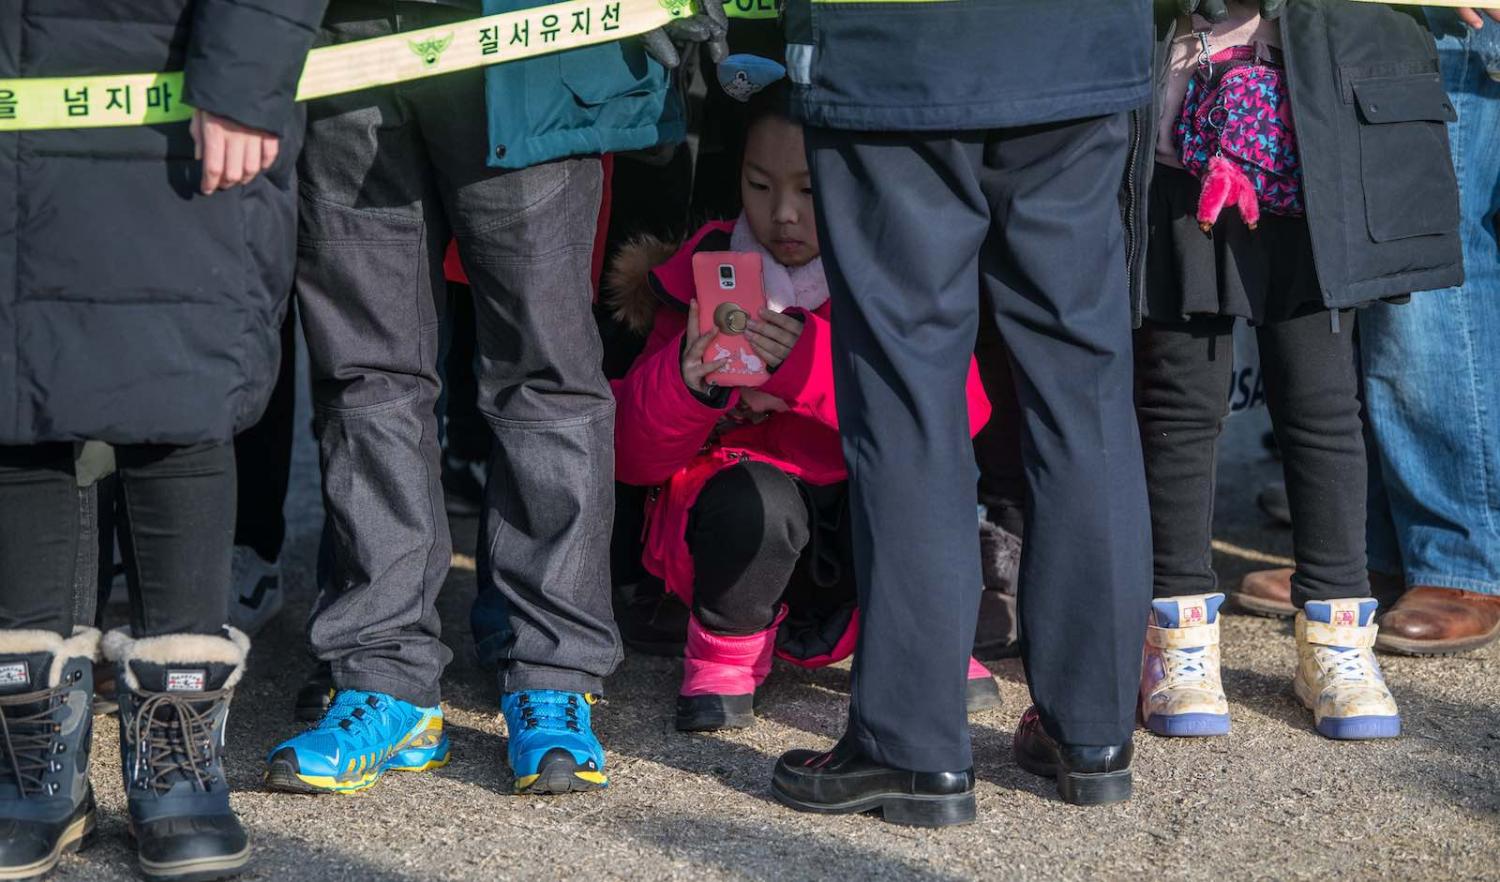 A girl crouches for a photograph during South Korea’s PyeongChang Winter Olympics in February (Photo: Carl Court/Getty) 